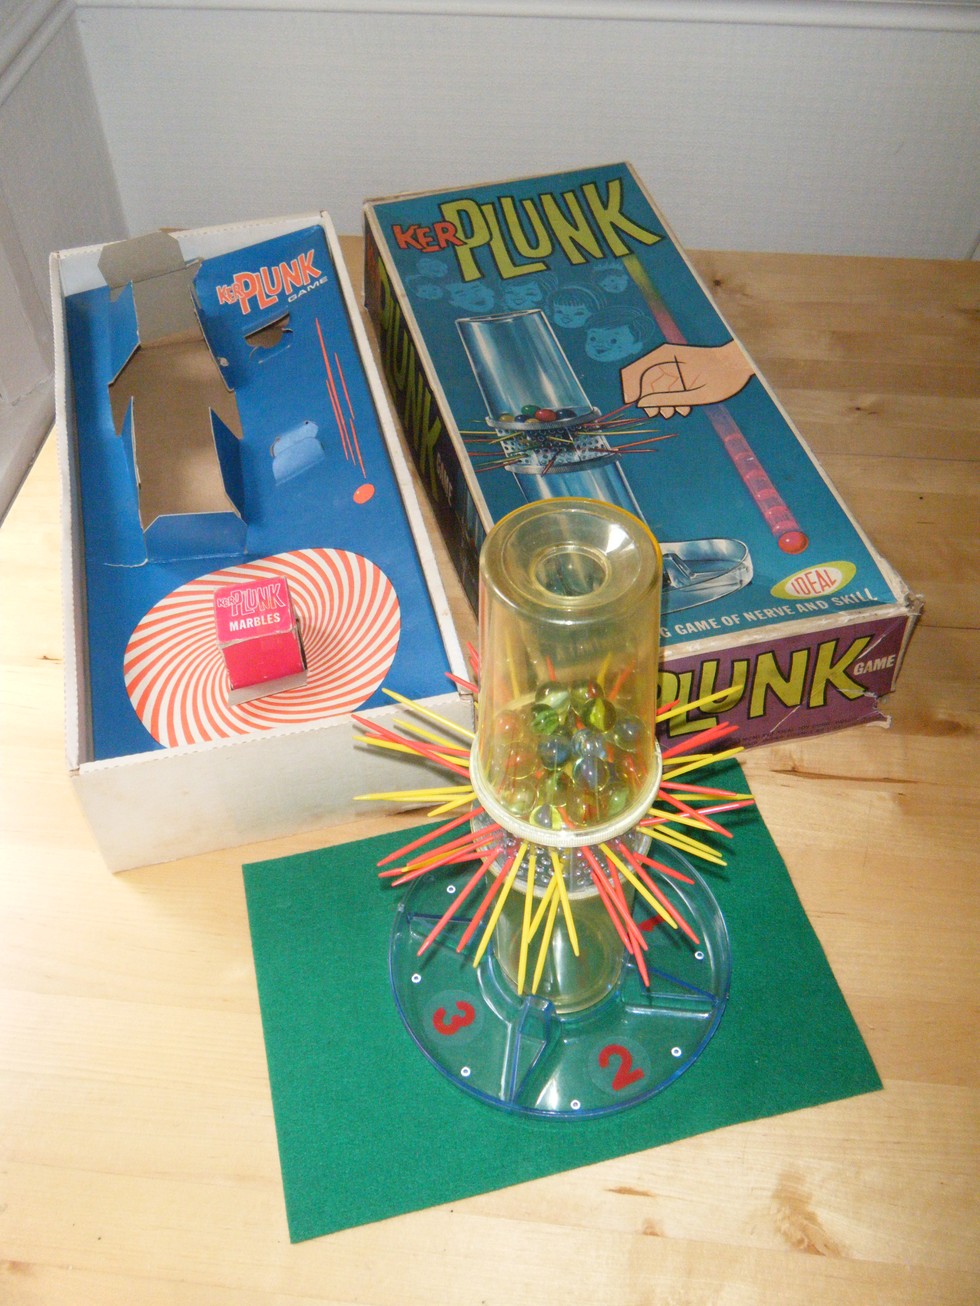 Do You Remember These Retro Board Games?